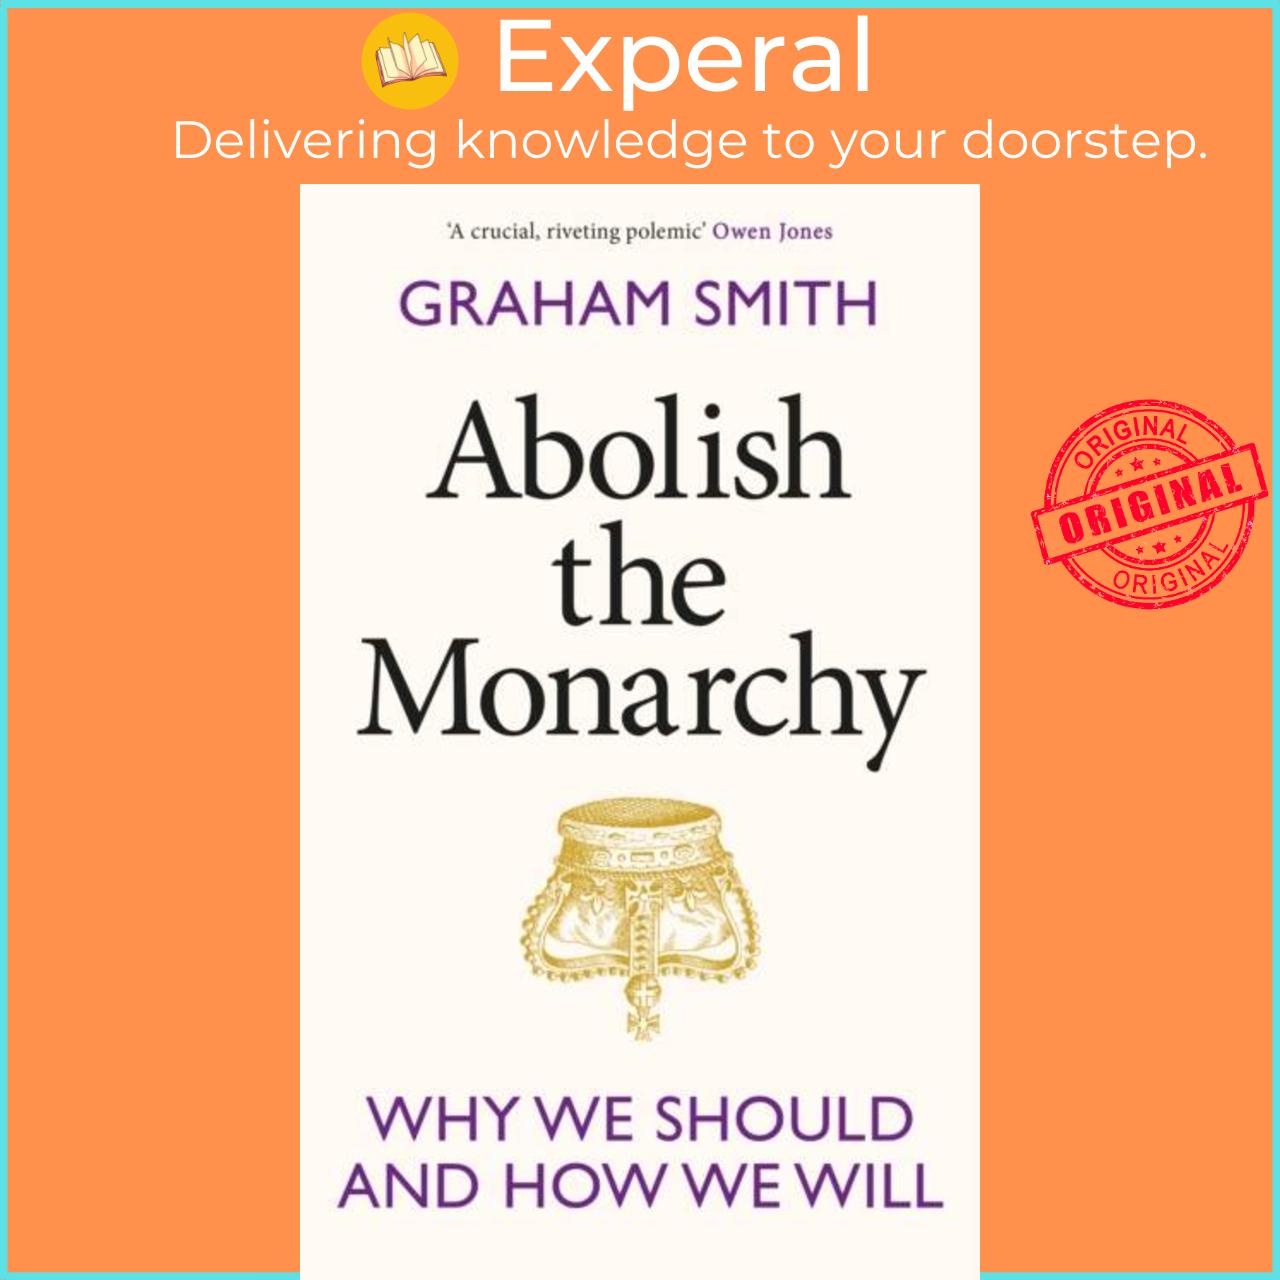 Sách - Abolish the Monarchy - Why we should and how we will by Graham Smith (UK edition, hardcover)